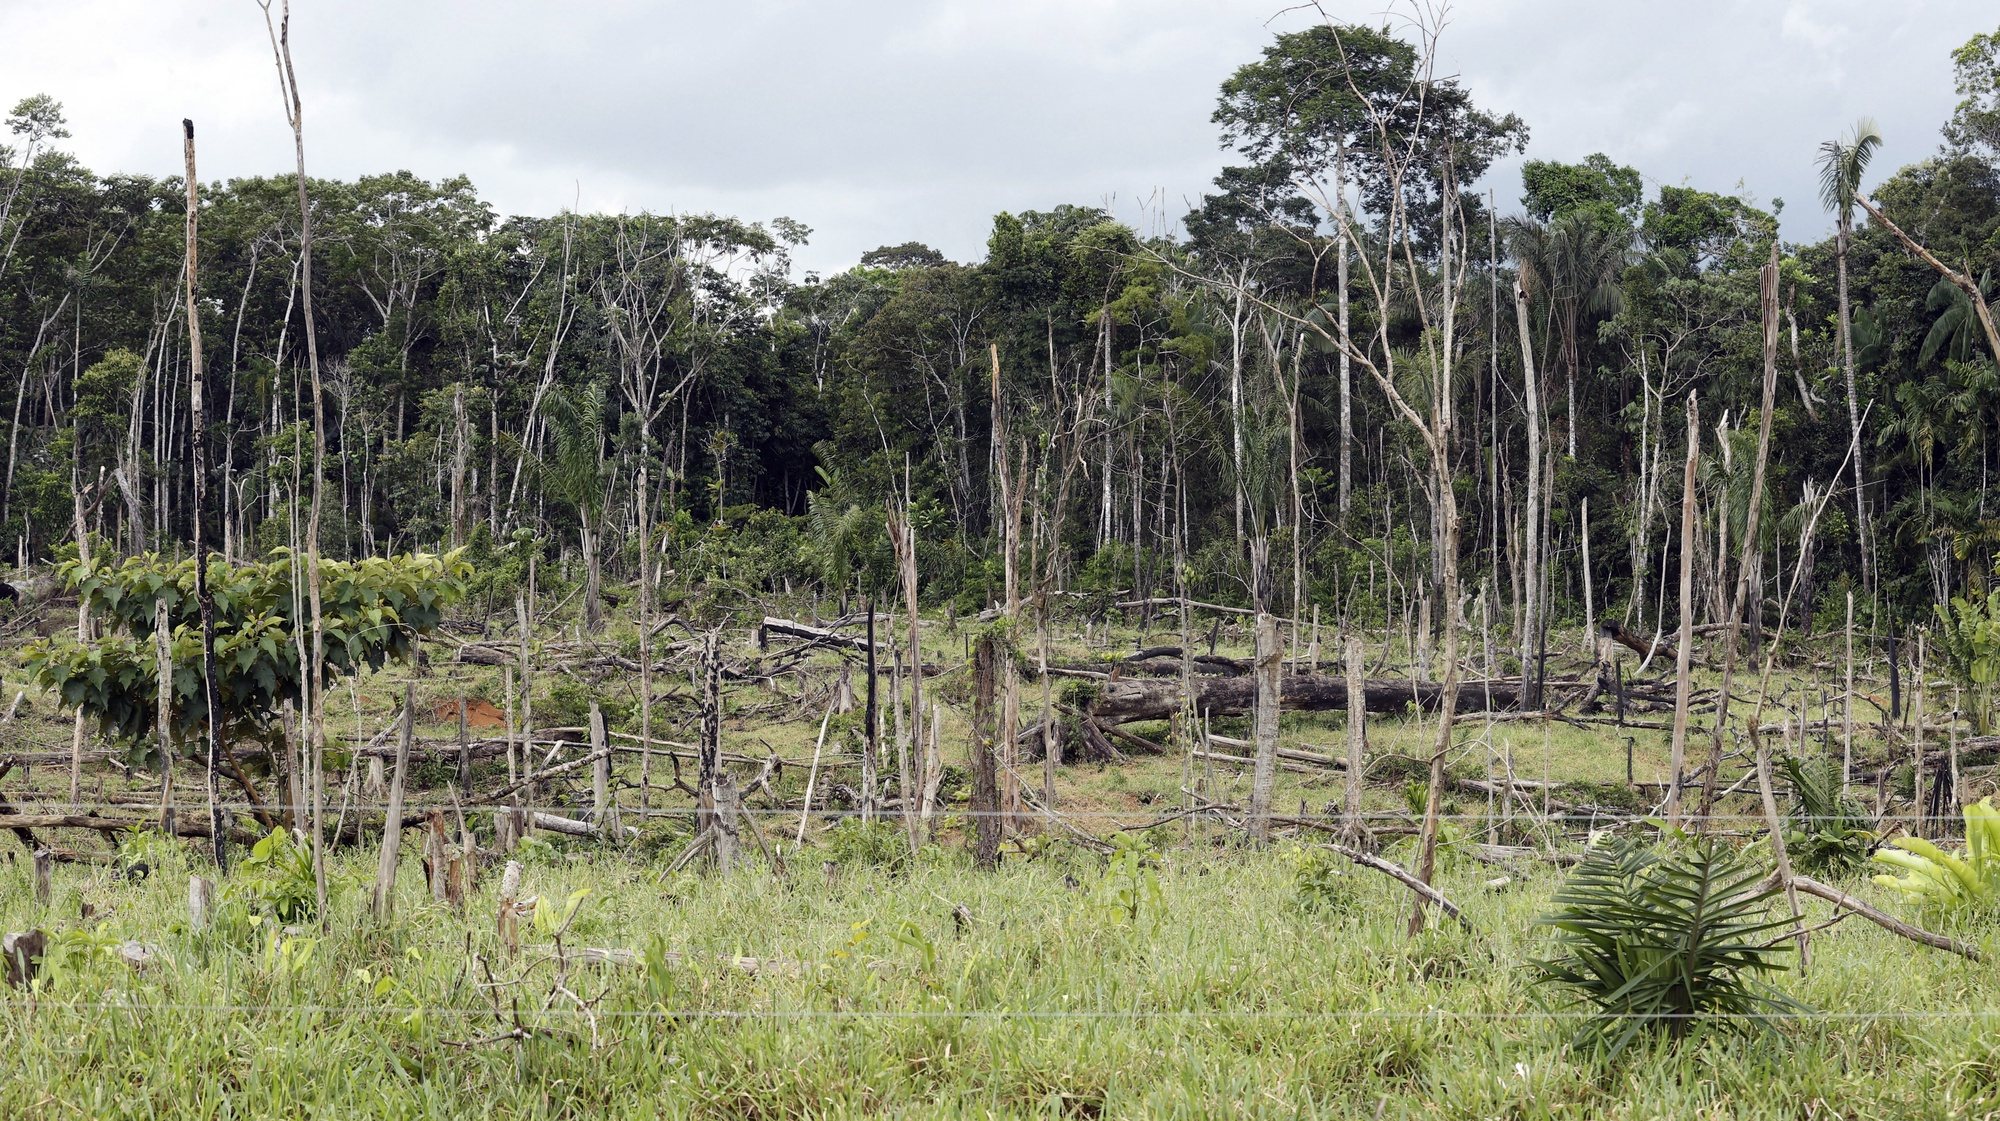 epa10145289 The deforested Amazon rainforest in San Jose del Guaviare, Colombia, 20 August 2022 (issued 29 August 2022). Despite the fact that deforestation is prohibited in Guaviare by the Colombian State and the dissidents, the Amazon jungle, which occupies practically the entire territory, continues to shrink year after year giving way to an immense pasture.  EPA/MAURICIO DUENAS CASTANEDA